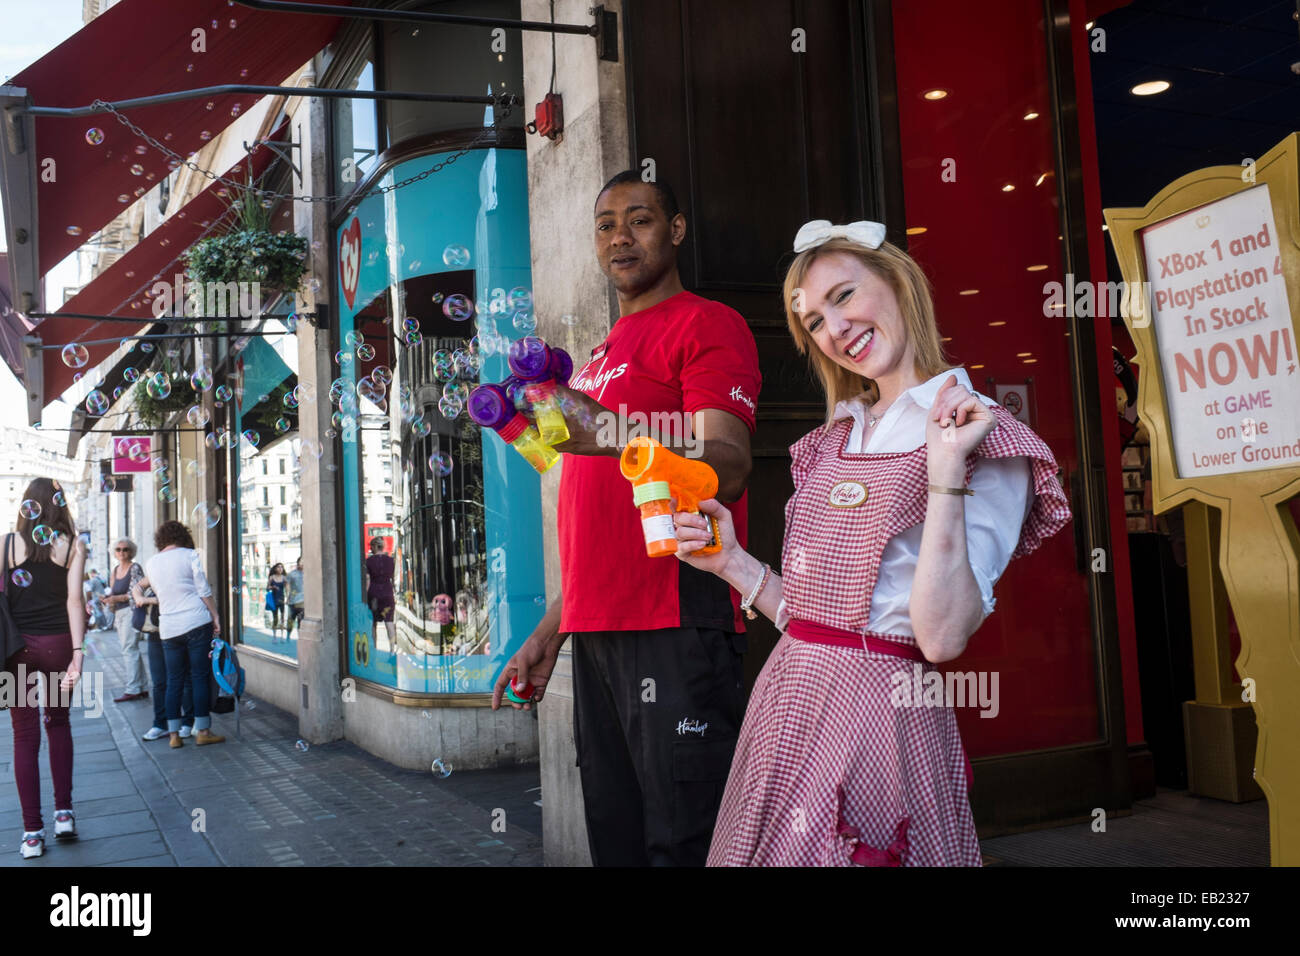 Hamleys Toy Shop staff demonstrate bubble machines toys to passing shoppers. Stock Photo